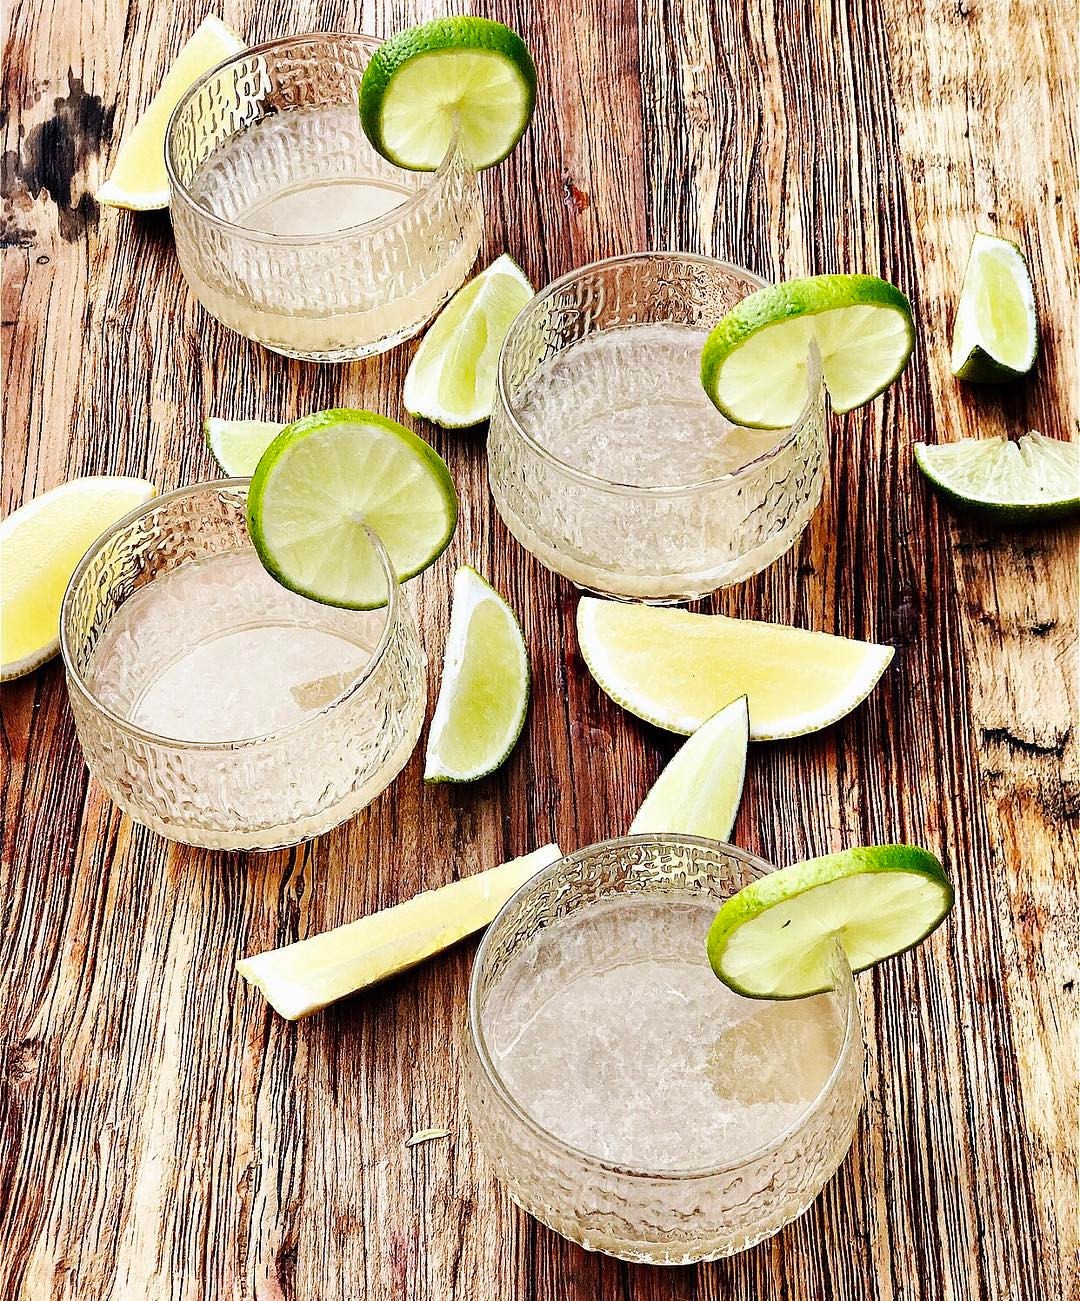 themargaritamum: “LIVE MARGARITA MUM UPDATE: I love public holidays and friends dropping in for a margarita! I just quickly mixed up these tart and tangy ‘Margarita Drop in’s’ …. Recipe: . 90mls @sxliquors cha Cha Cha tequila with lemon and...